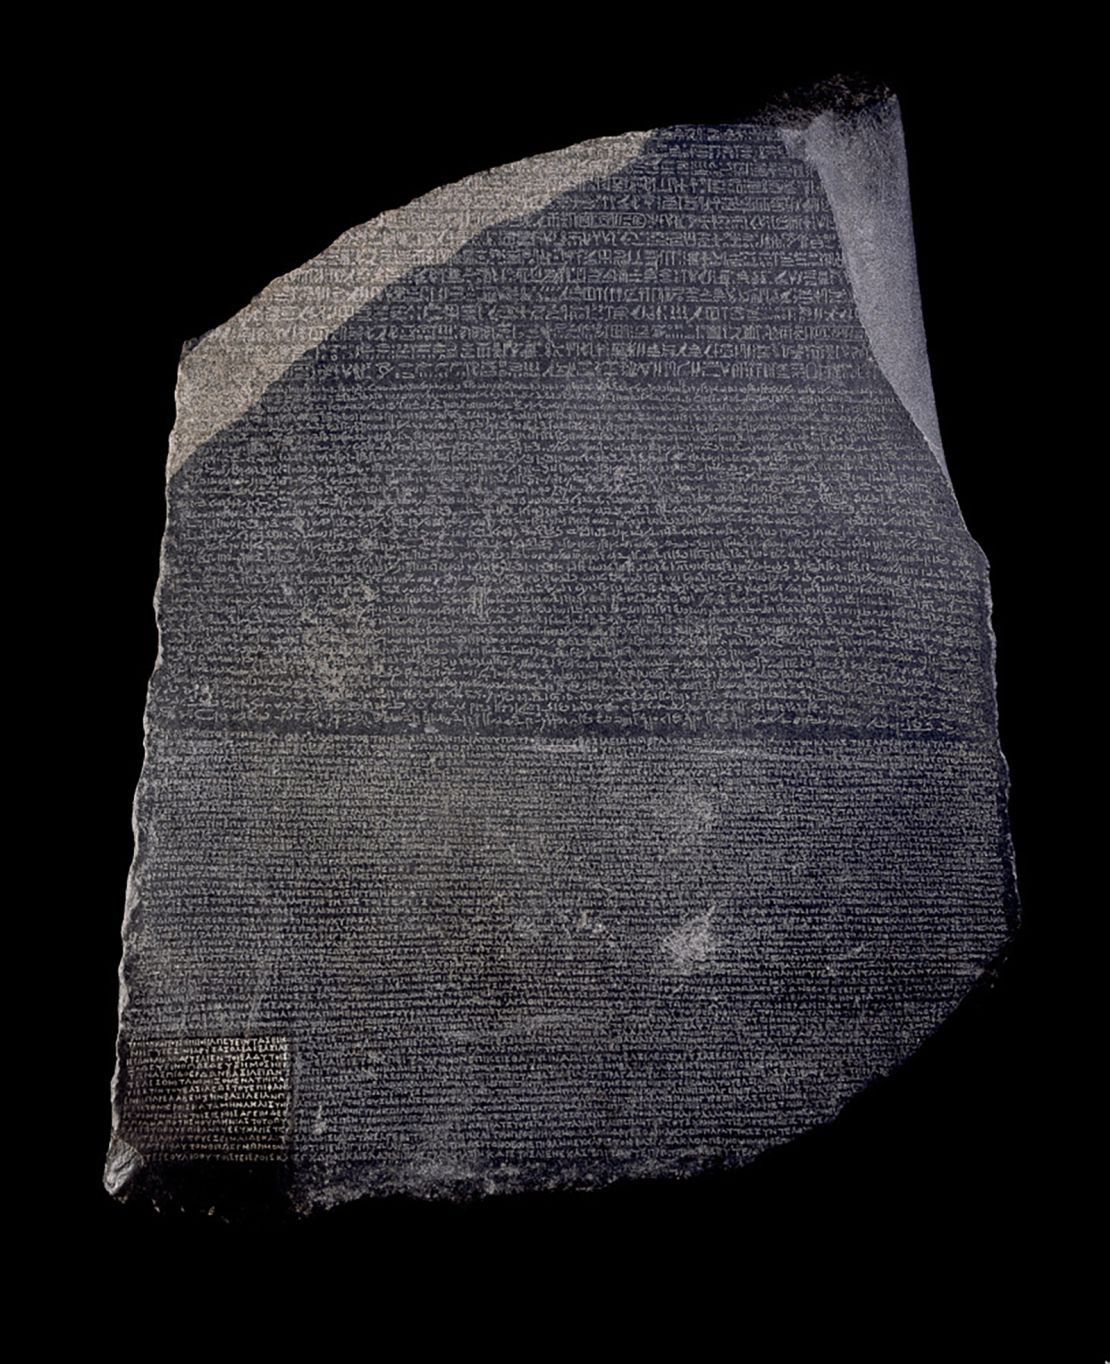 The Rosetta stone has been at The British Museum in London since 1802.